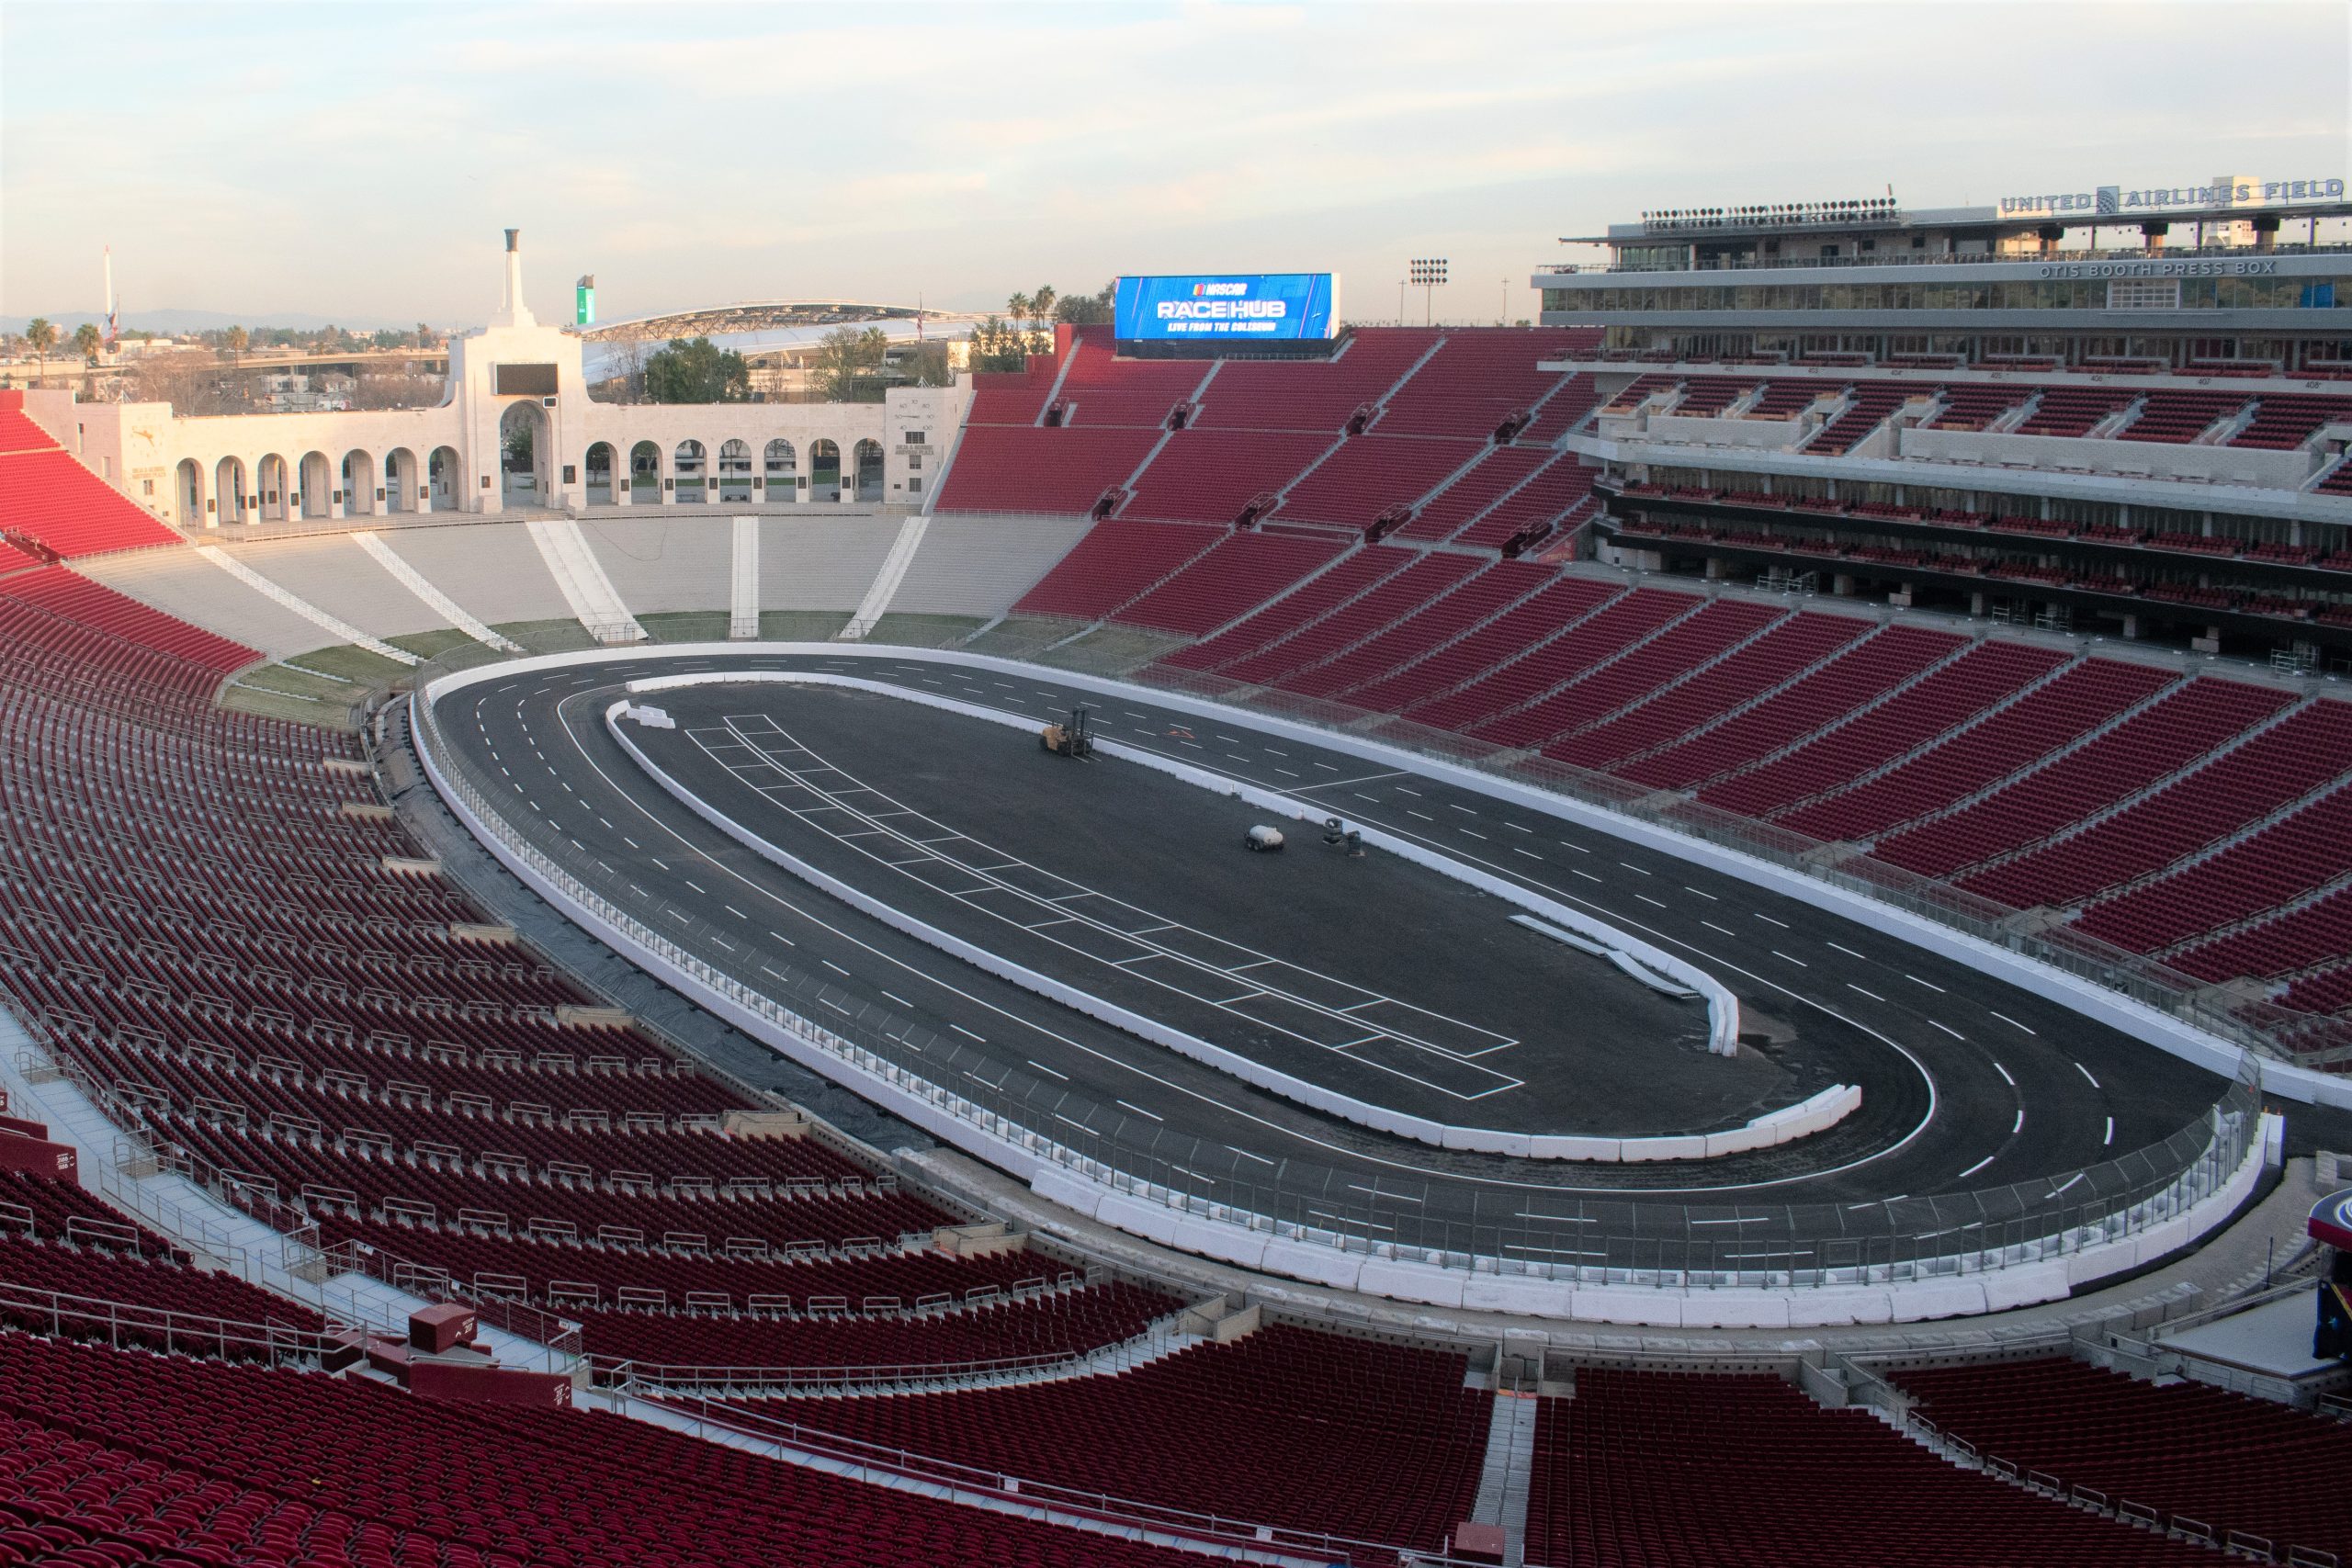 NASCAR is Racing in Los Angeles Memorial Coliseum Tonight—Heres Why Thats a Big Deal